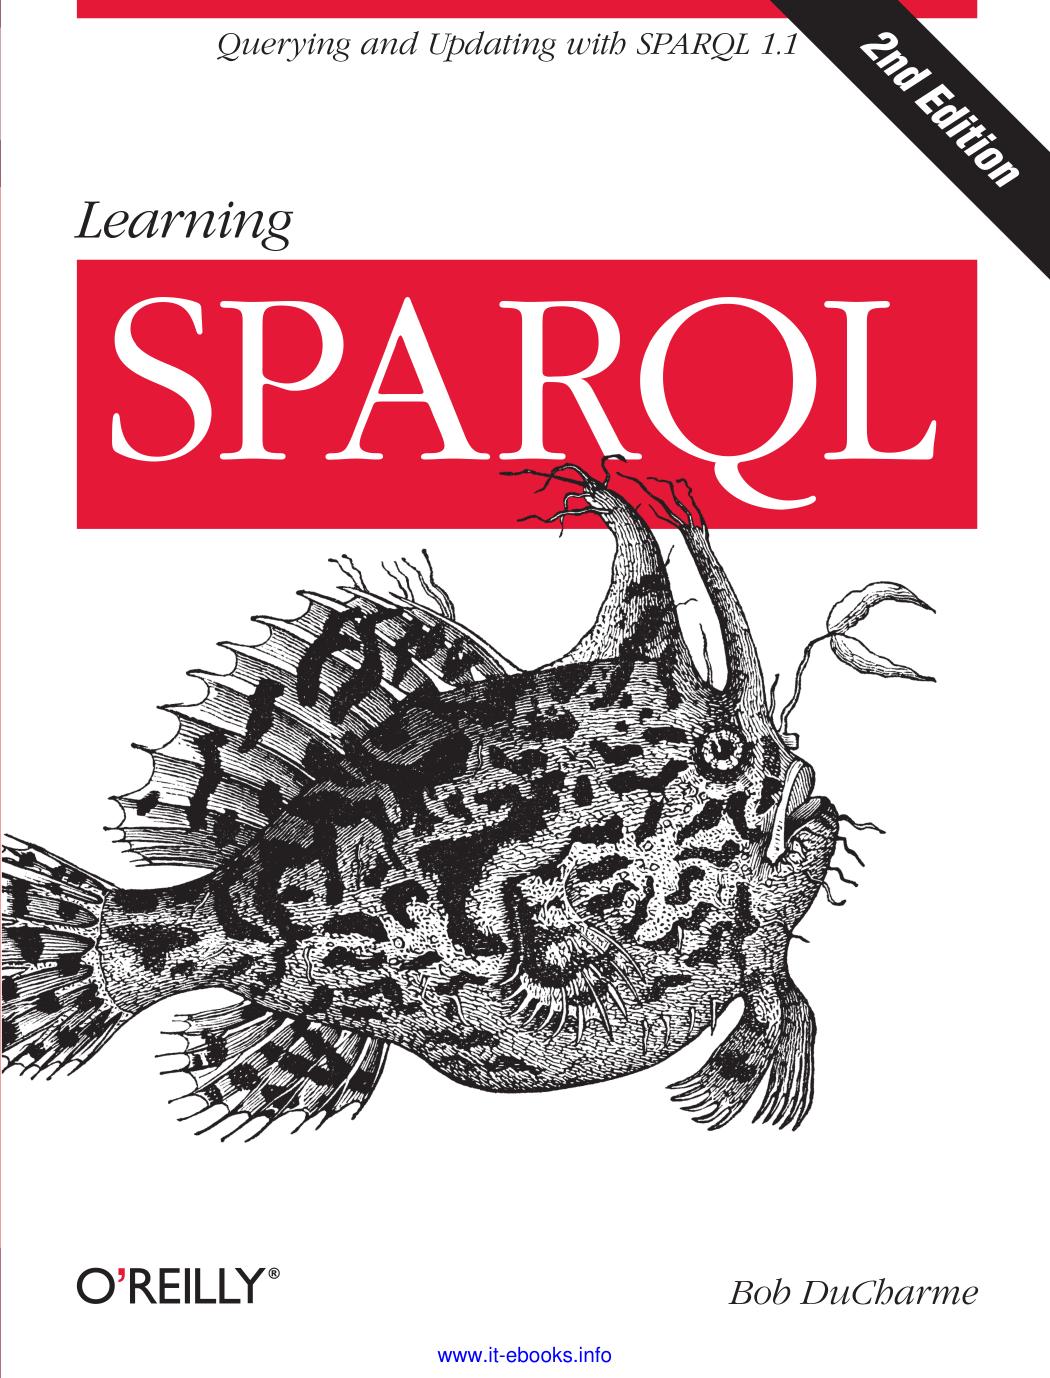 Learning SPARQL: Querying and Updating With SPARQL 1.1